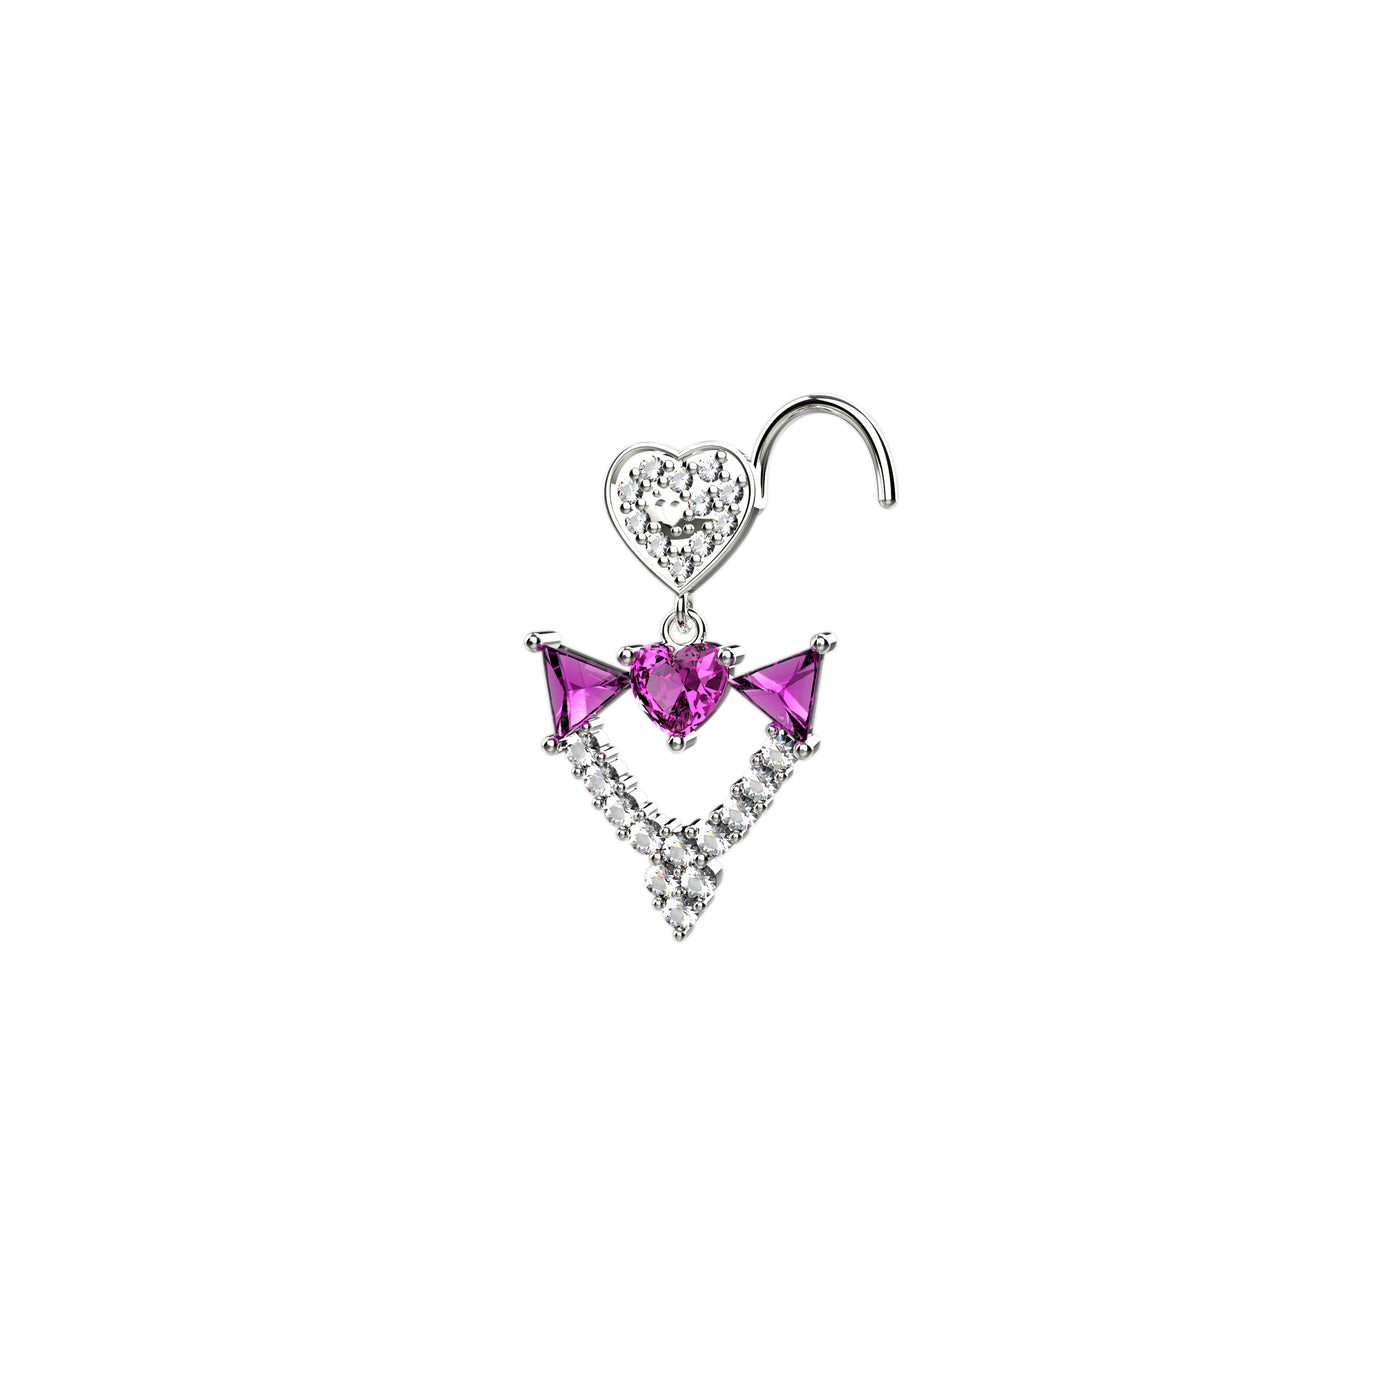 Heart Shaped Dangling Crown Gold Nose Stud